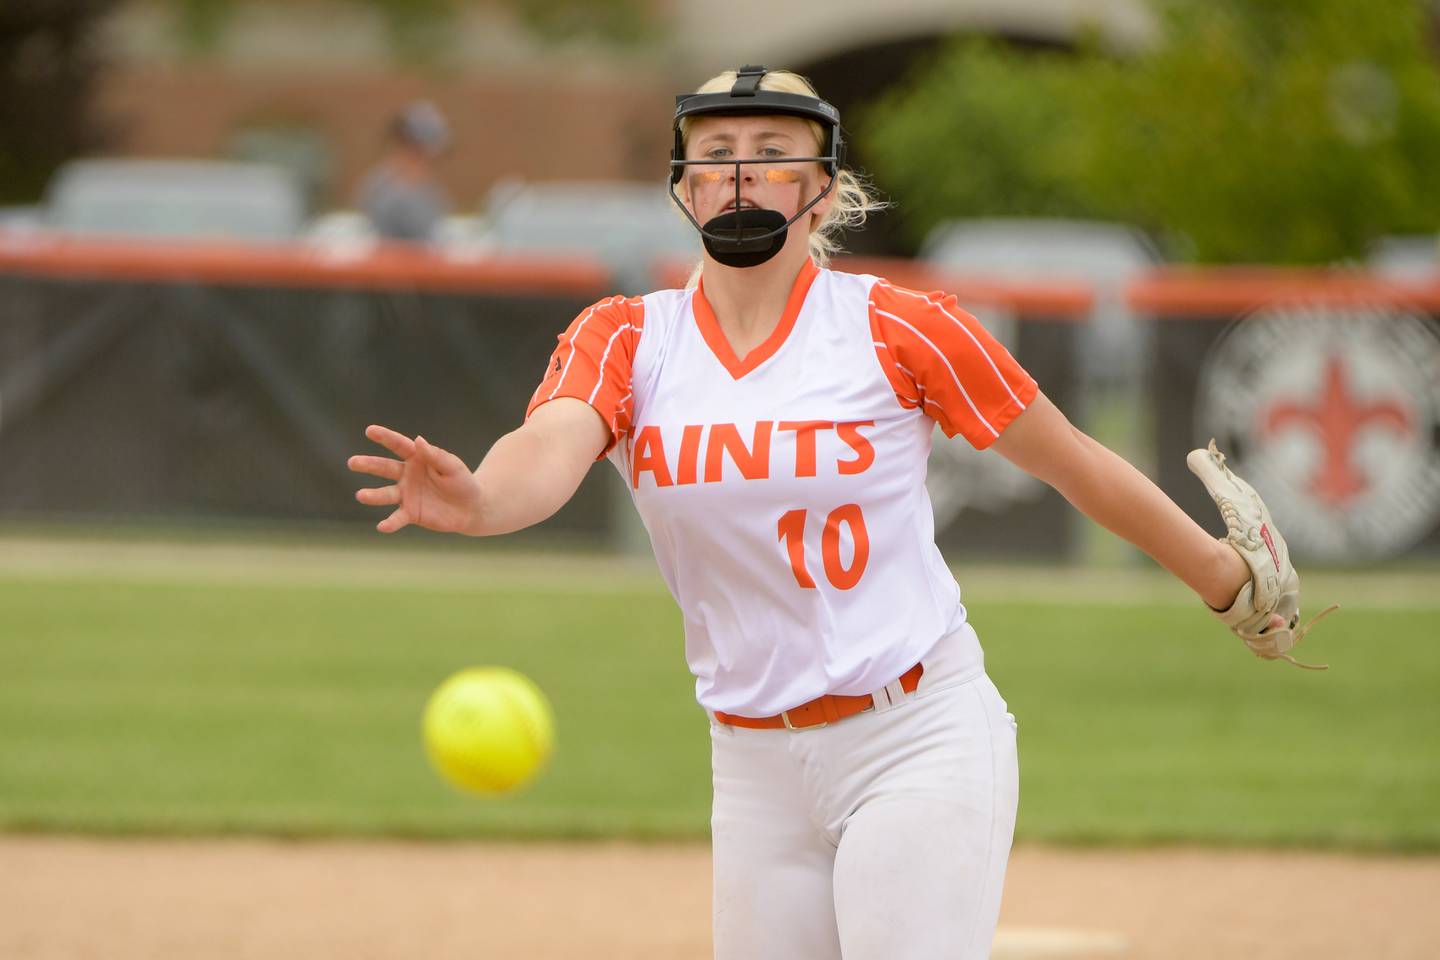 St. Charles East's Izzy Howe pitches against Glenbard North during the Class 4A St. Charles East Sectional semifinal on Tuesday, May 31, 2022.